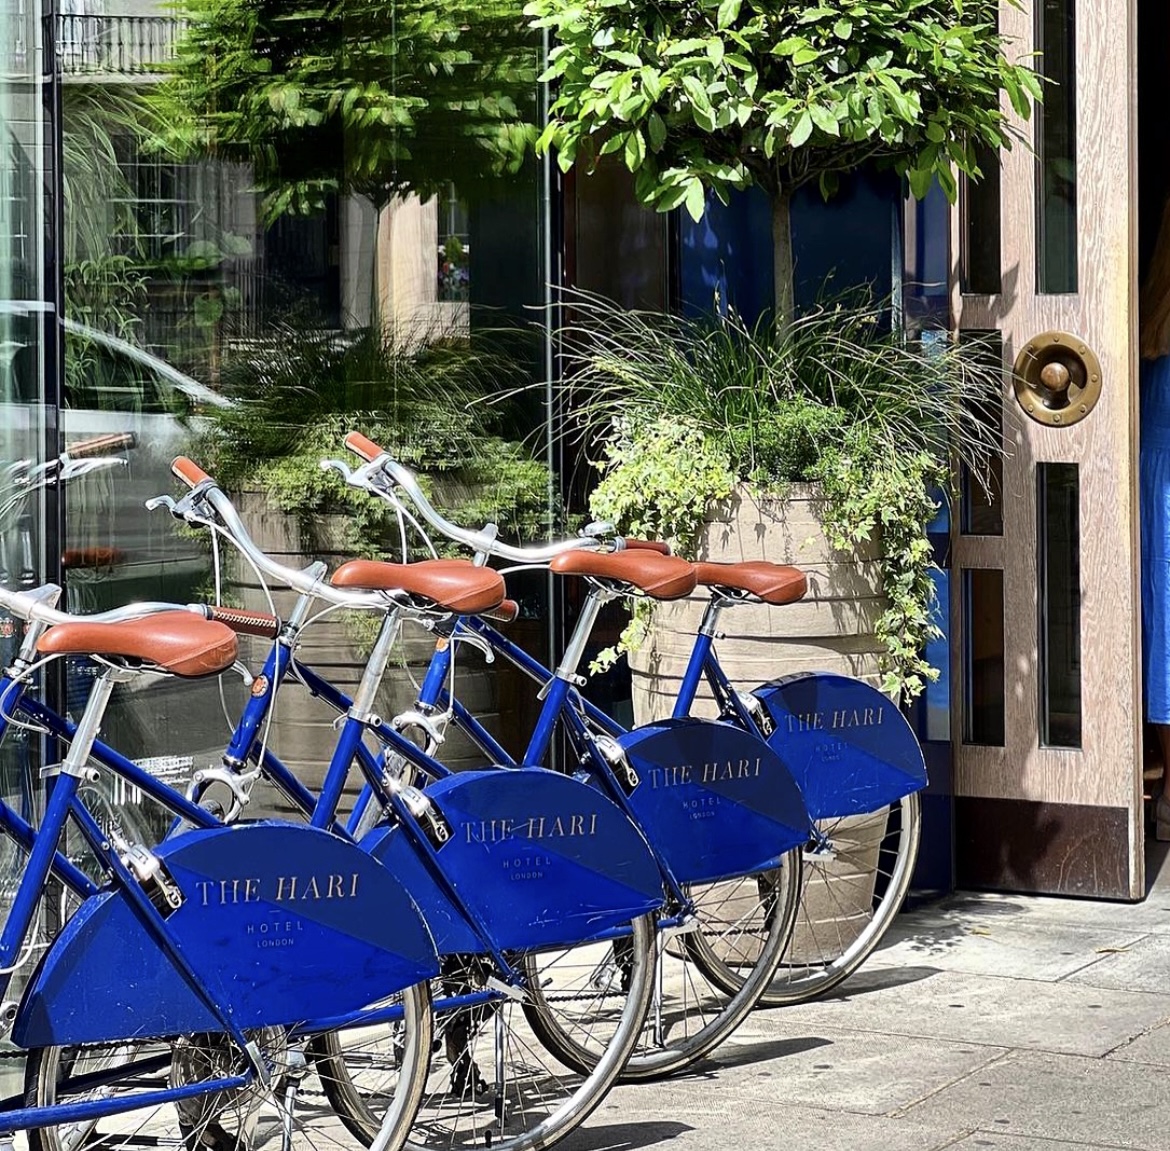 Celebrate #NationalEarthDay at The Hari this weekend! 🌍🚲 From donations and beautifully-crafted seed paper, to bottomless brunch with sustainable spirits and cocktails, we are working towards giving guests an energy conscious and environmentally-friendly stay.